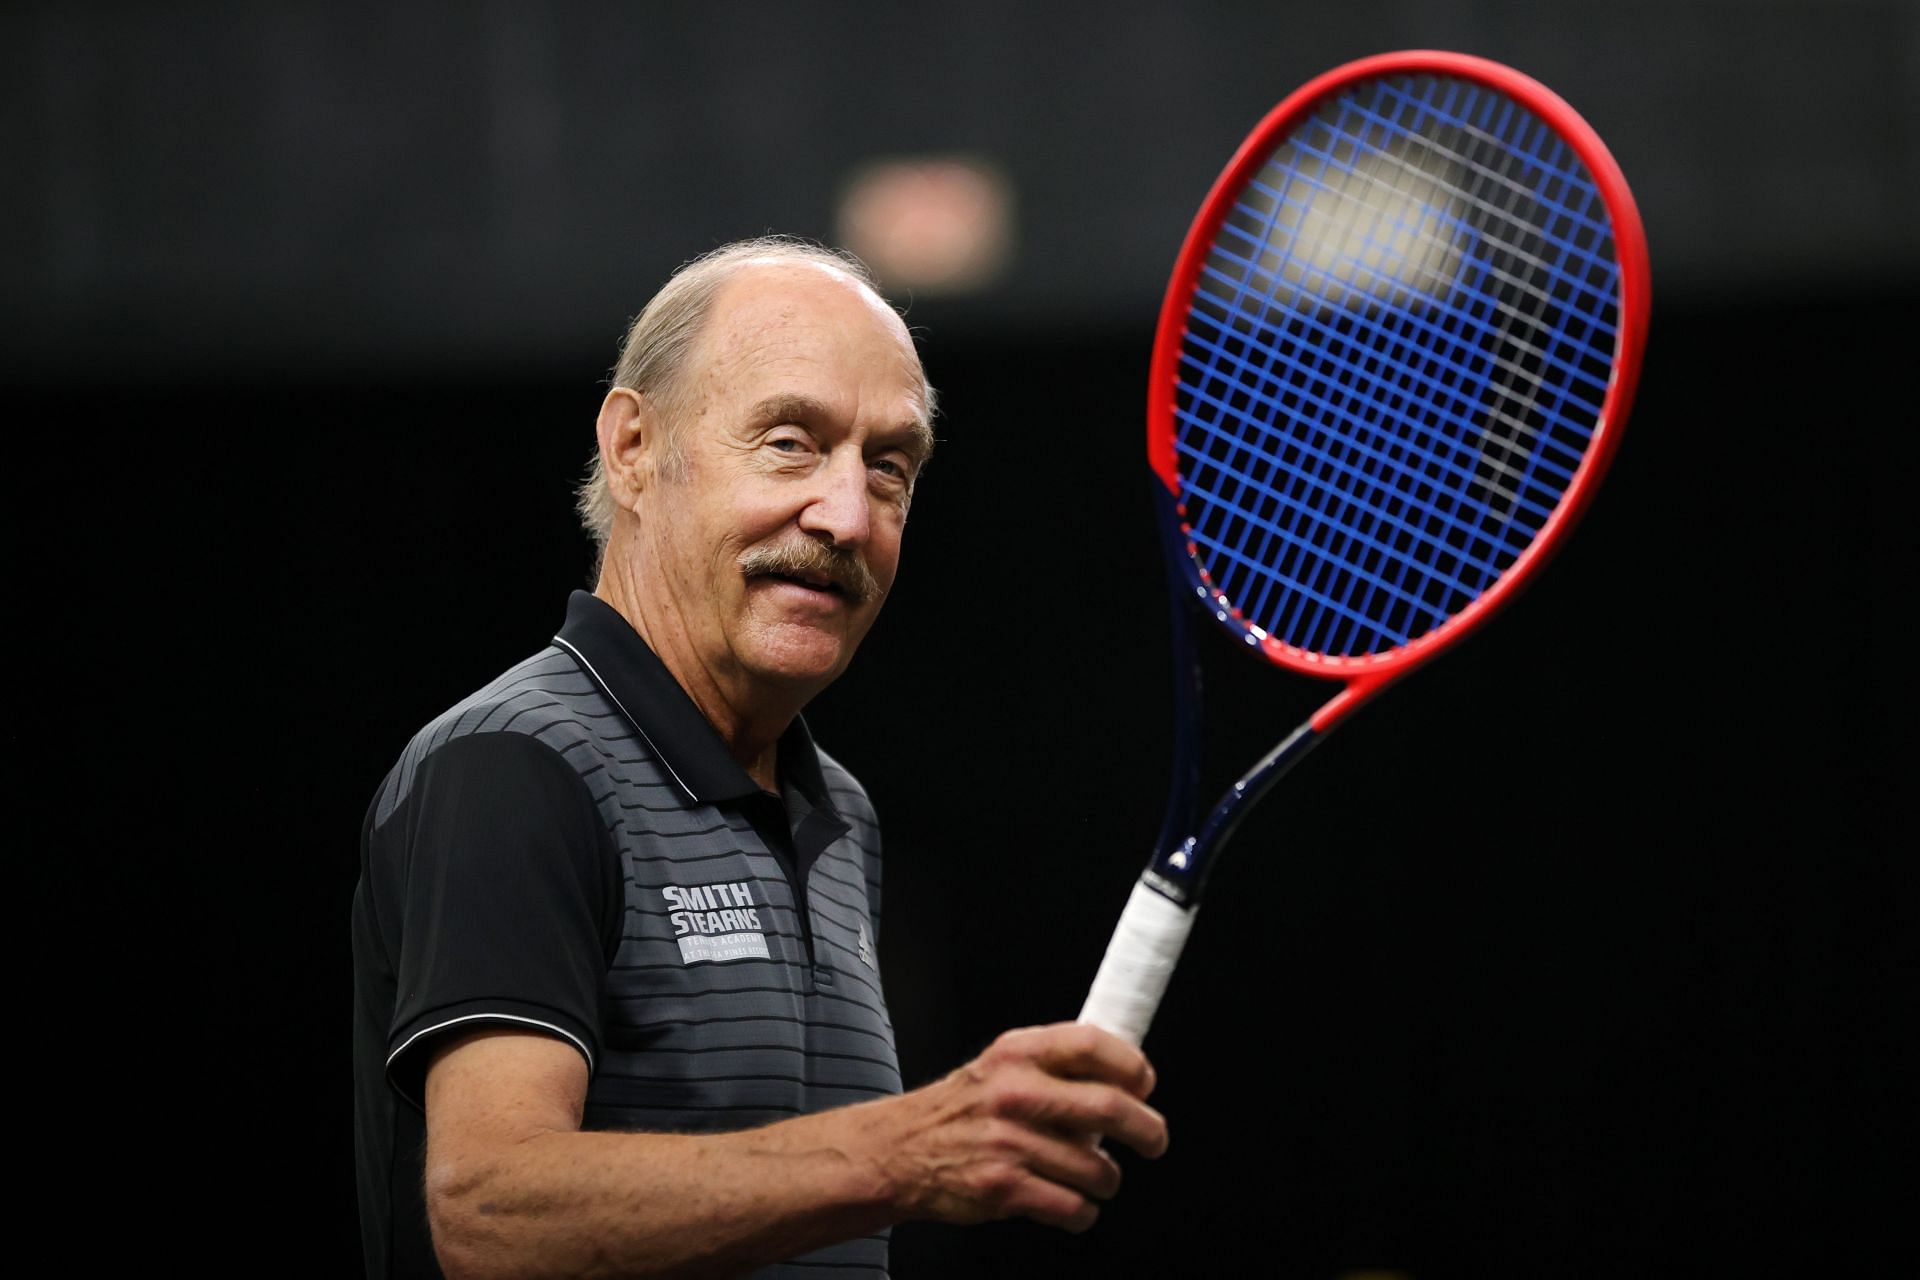 Stan Smith poses with a tennis racket